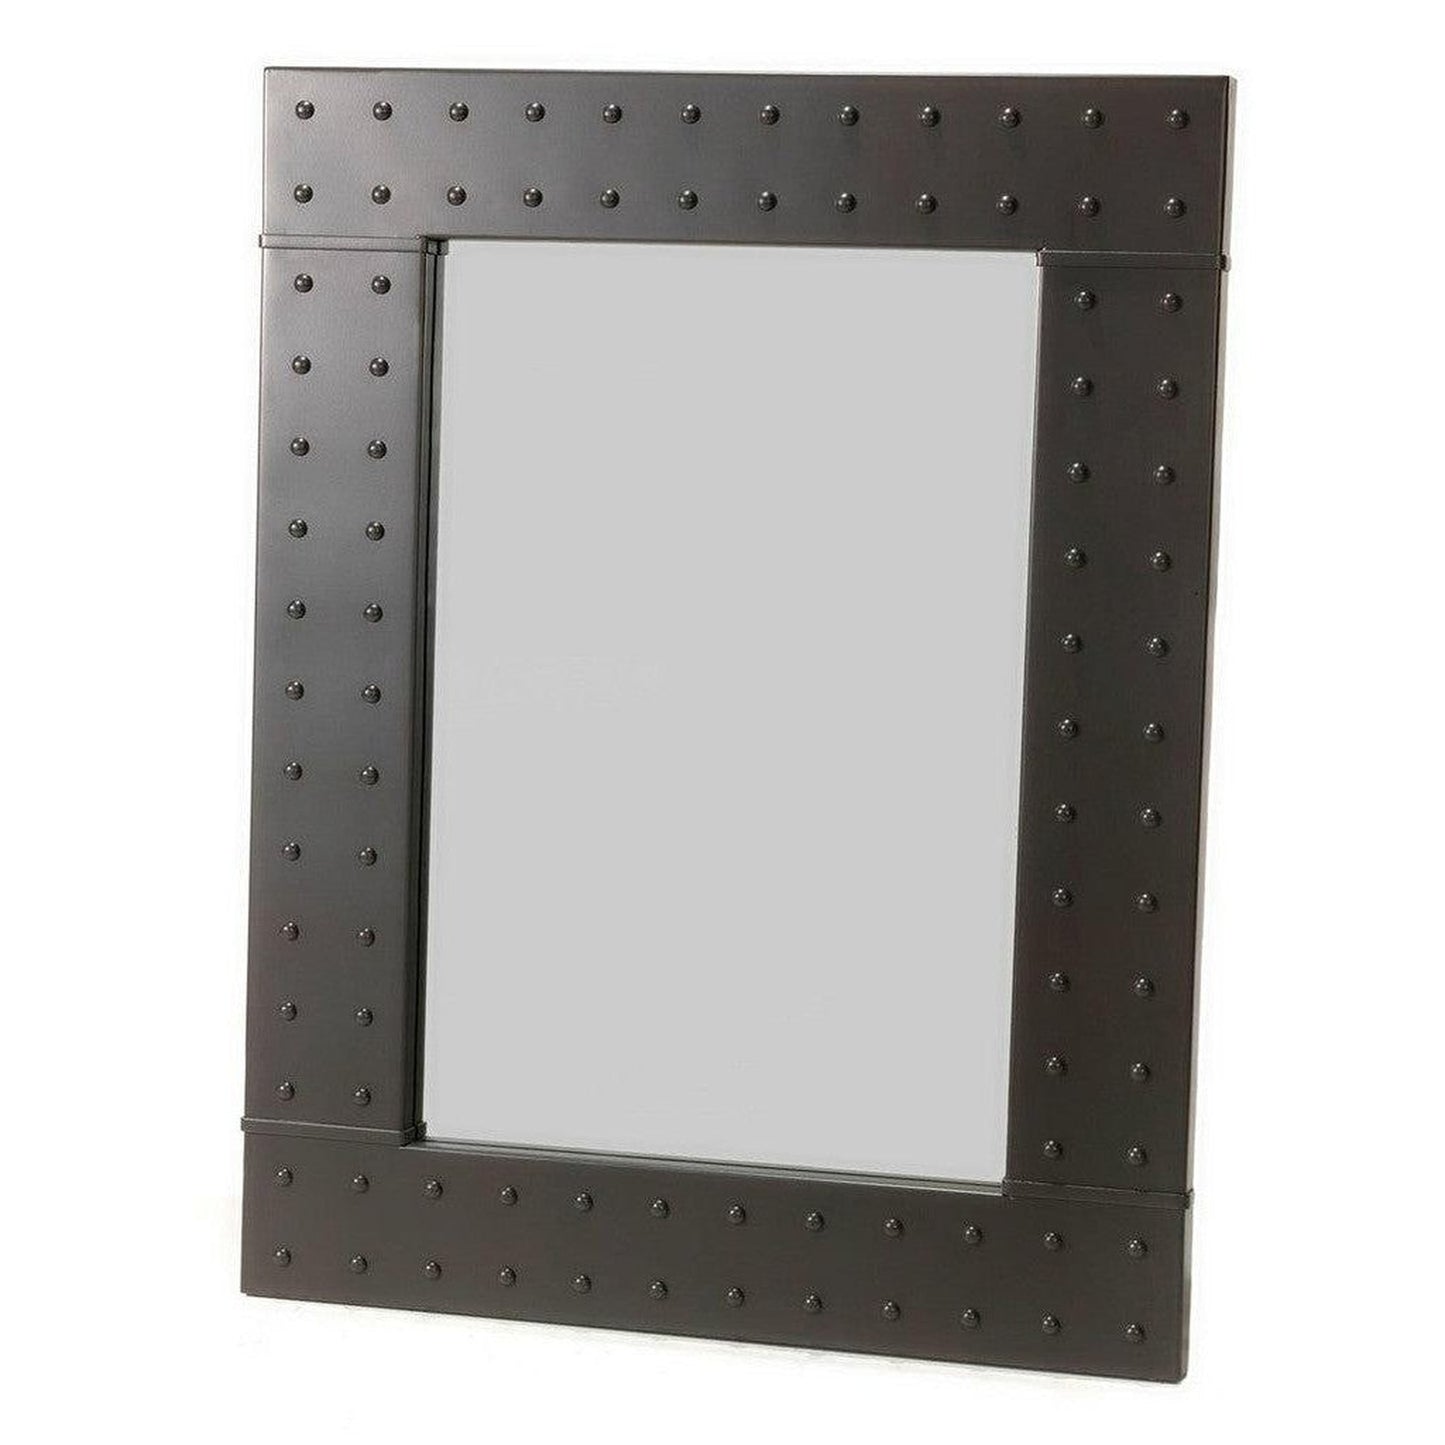 Stone County Ironworks Merrimack Rivet 36" x 45" Large Chalk White Iron Wall Mirror With Pewter Iron Accent